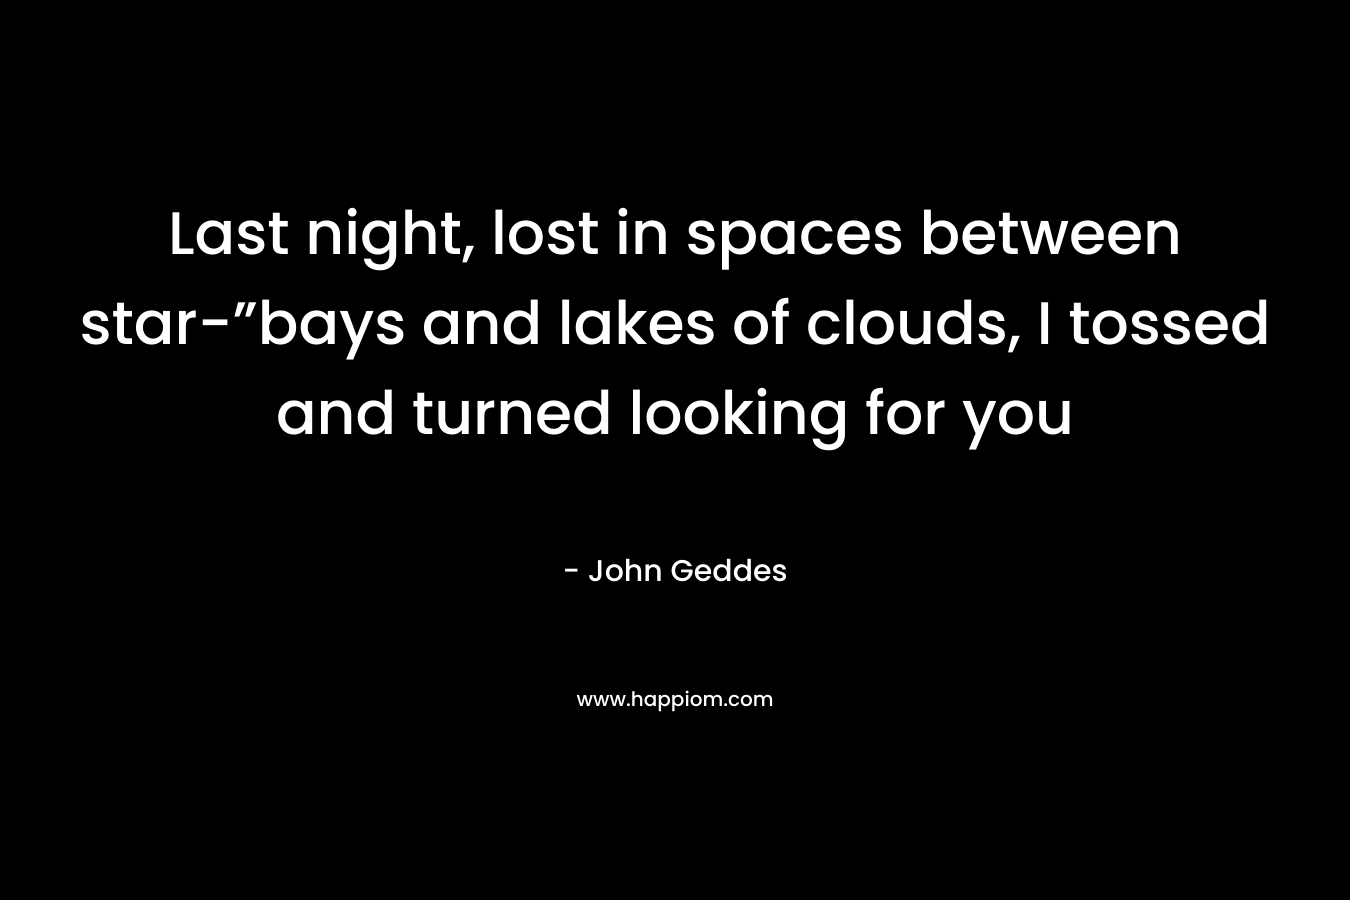 Last night, lost in spaces between star-”bays and lakes of clouds, I tossed and turned looking for you